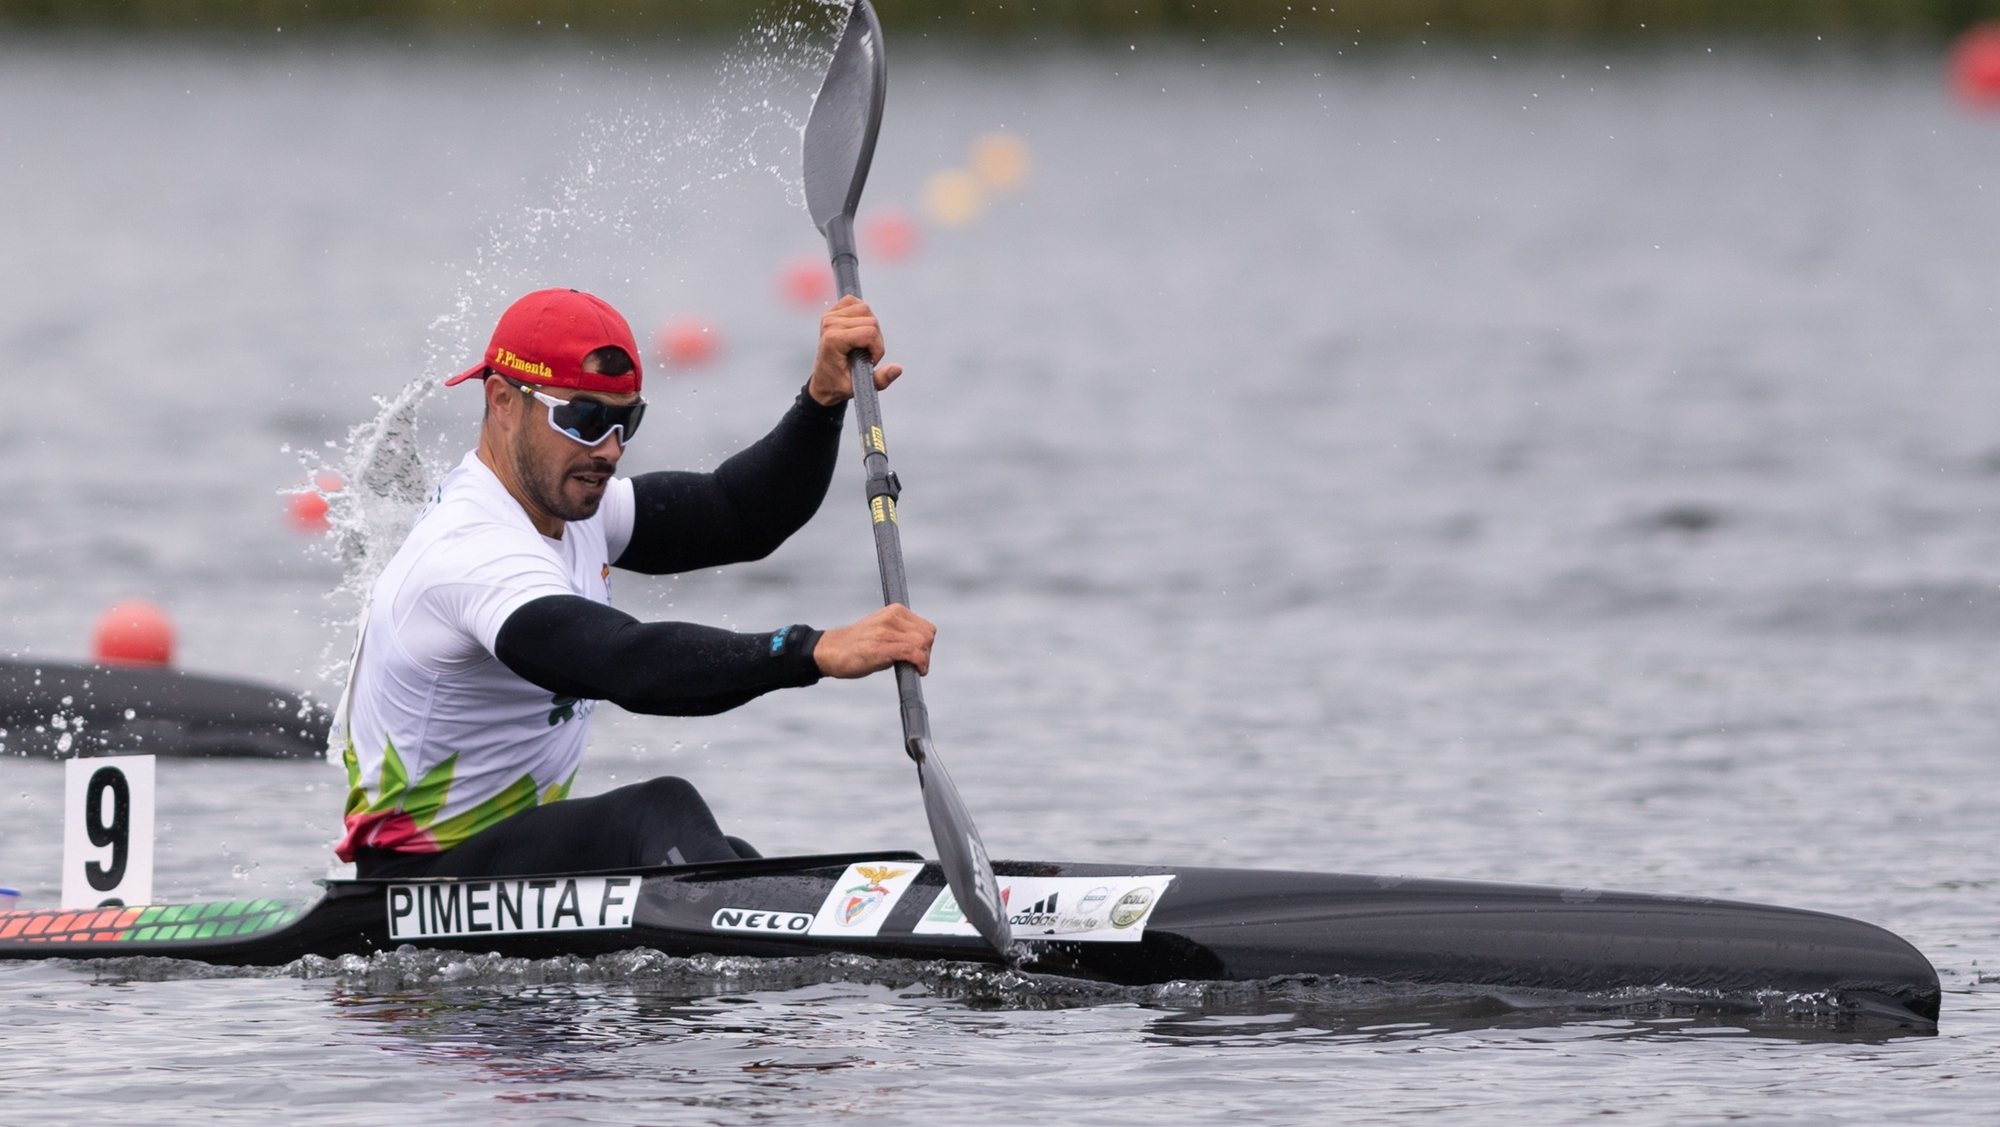 epa09983985 Fernando Pimenta of Portugal on his way to win the men&#039;s K1 500m final race at the ICF Kayak and Canoe World Cup event in Poznan, Poland, 29 May 2022.  EPA/Jakub Kaczmarczyk POLAND OUT